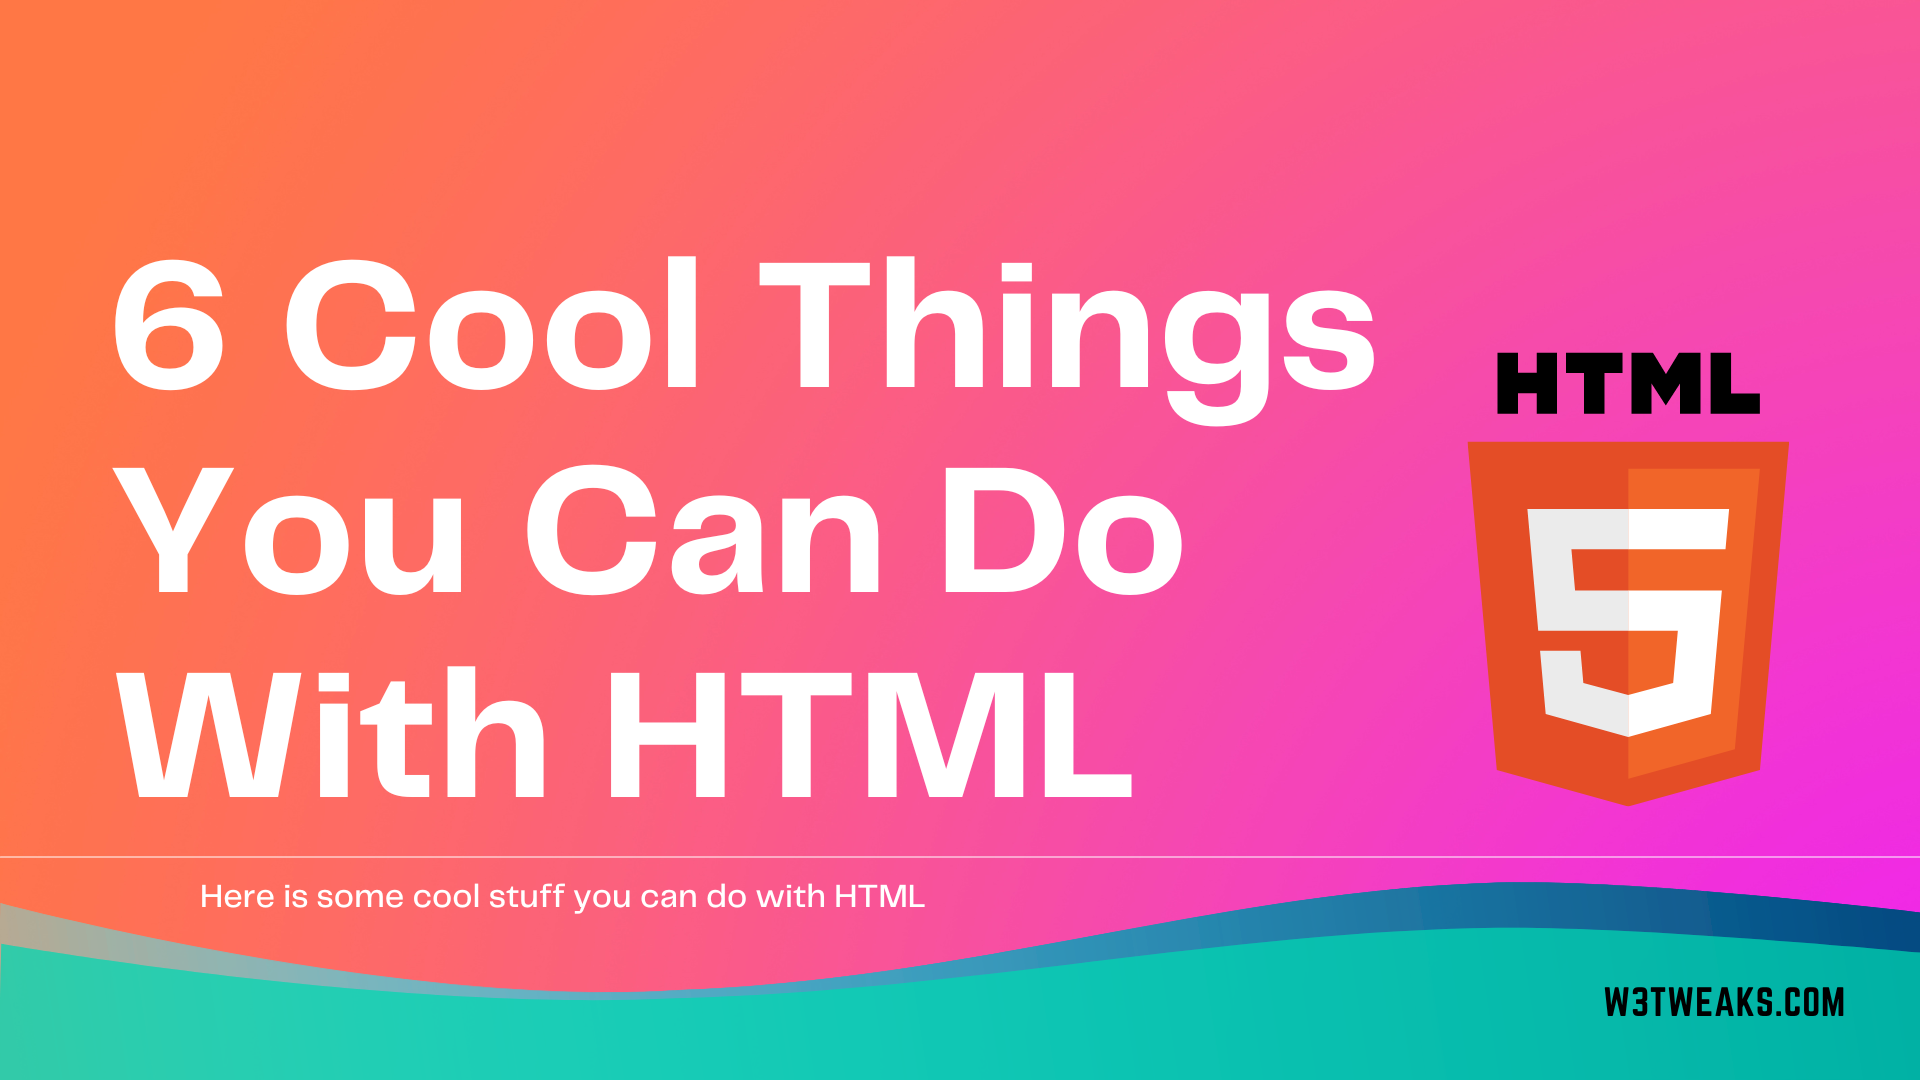 6 Cool Things You Can Do With HTML